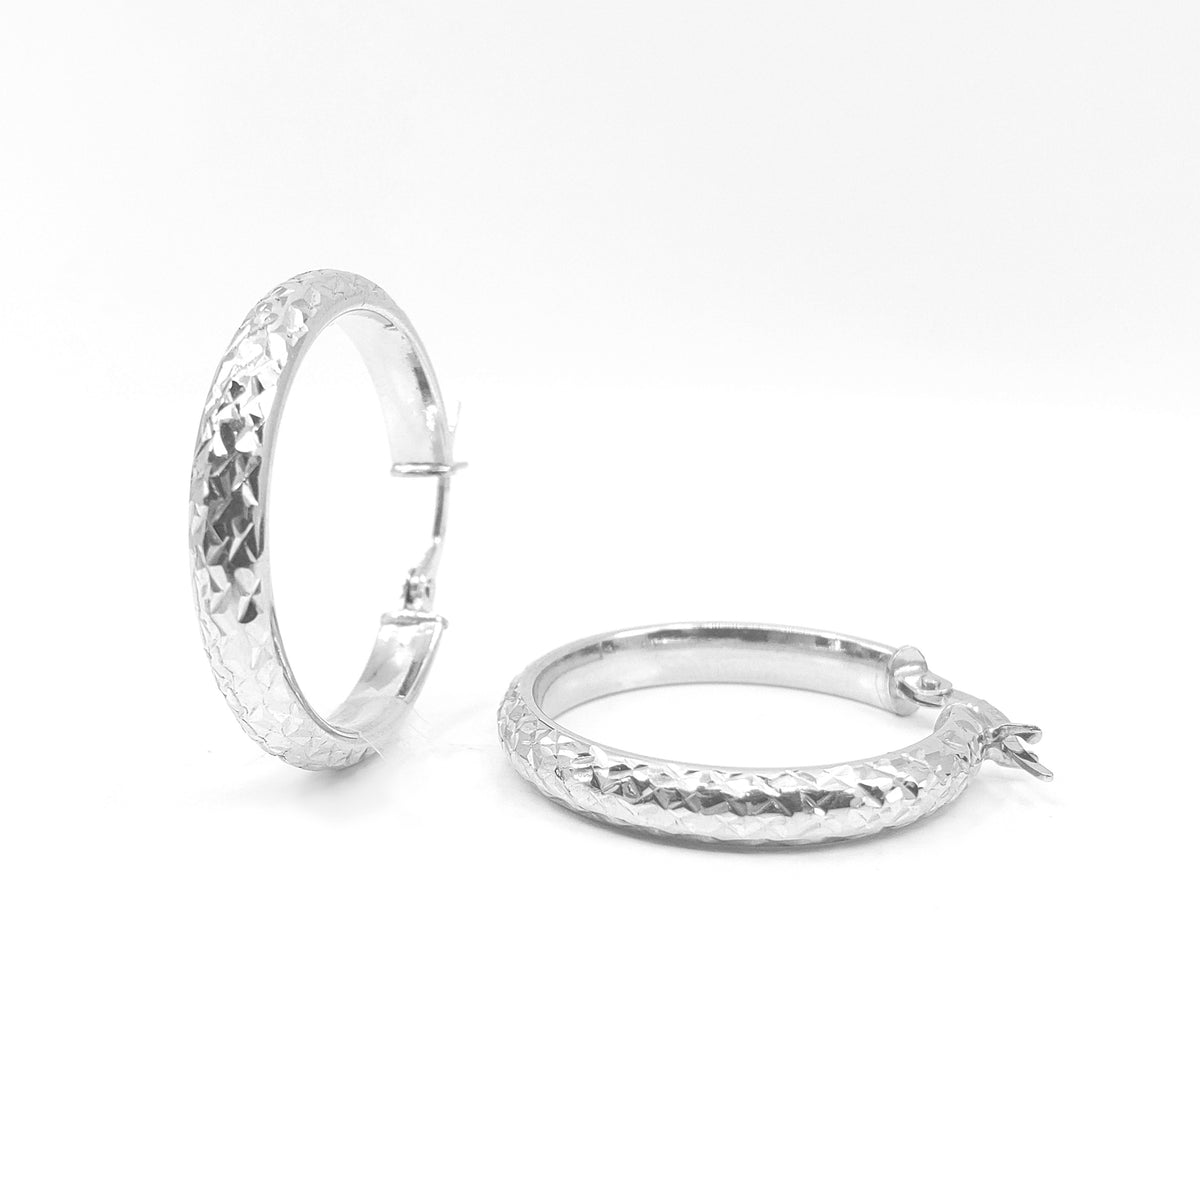 10K White Gold Etched Hoops - 30mm